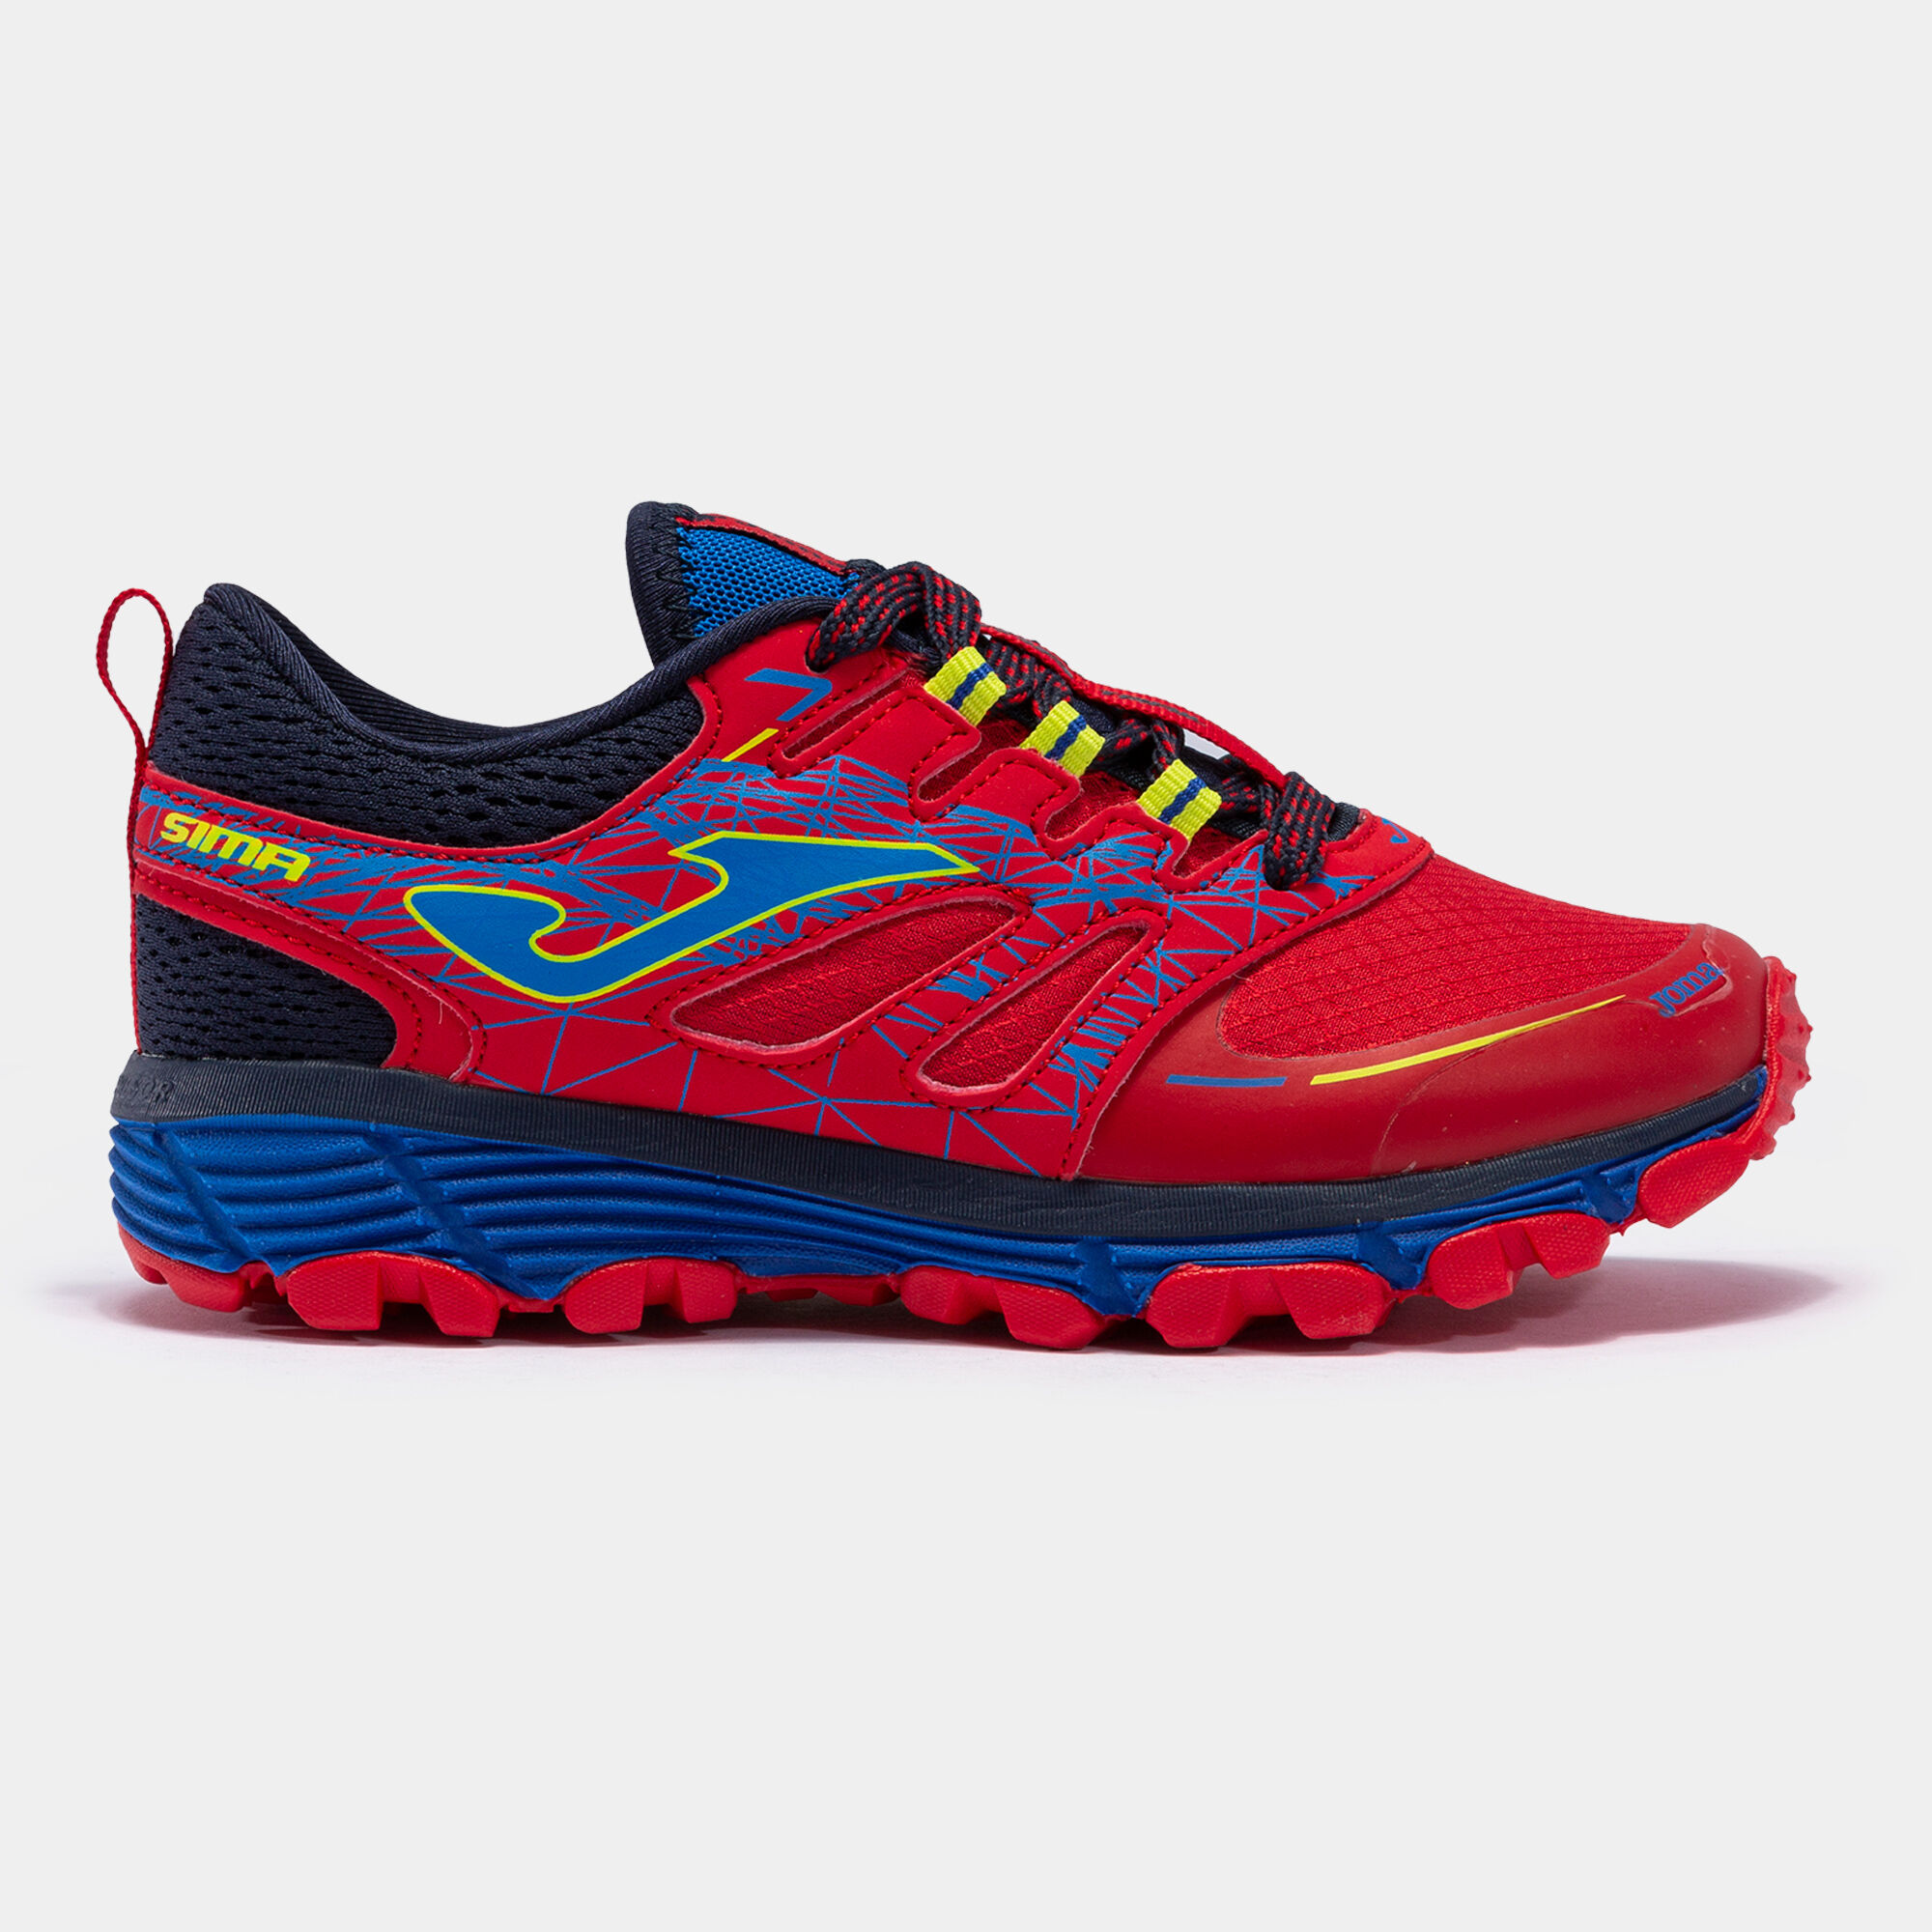 TRAIL-RUNNING SHOES SIMA 22 JUNIOR RED NAVY BLUE